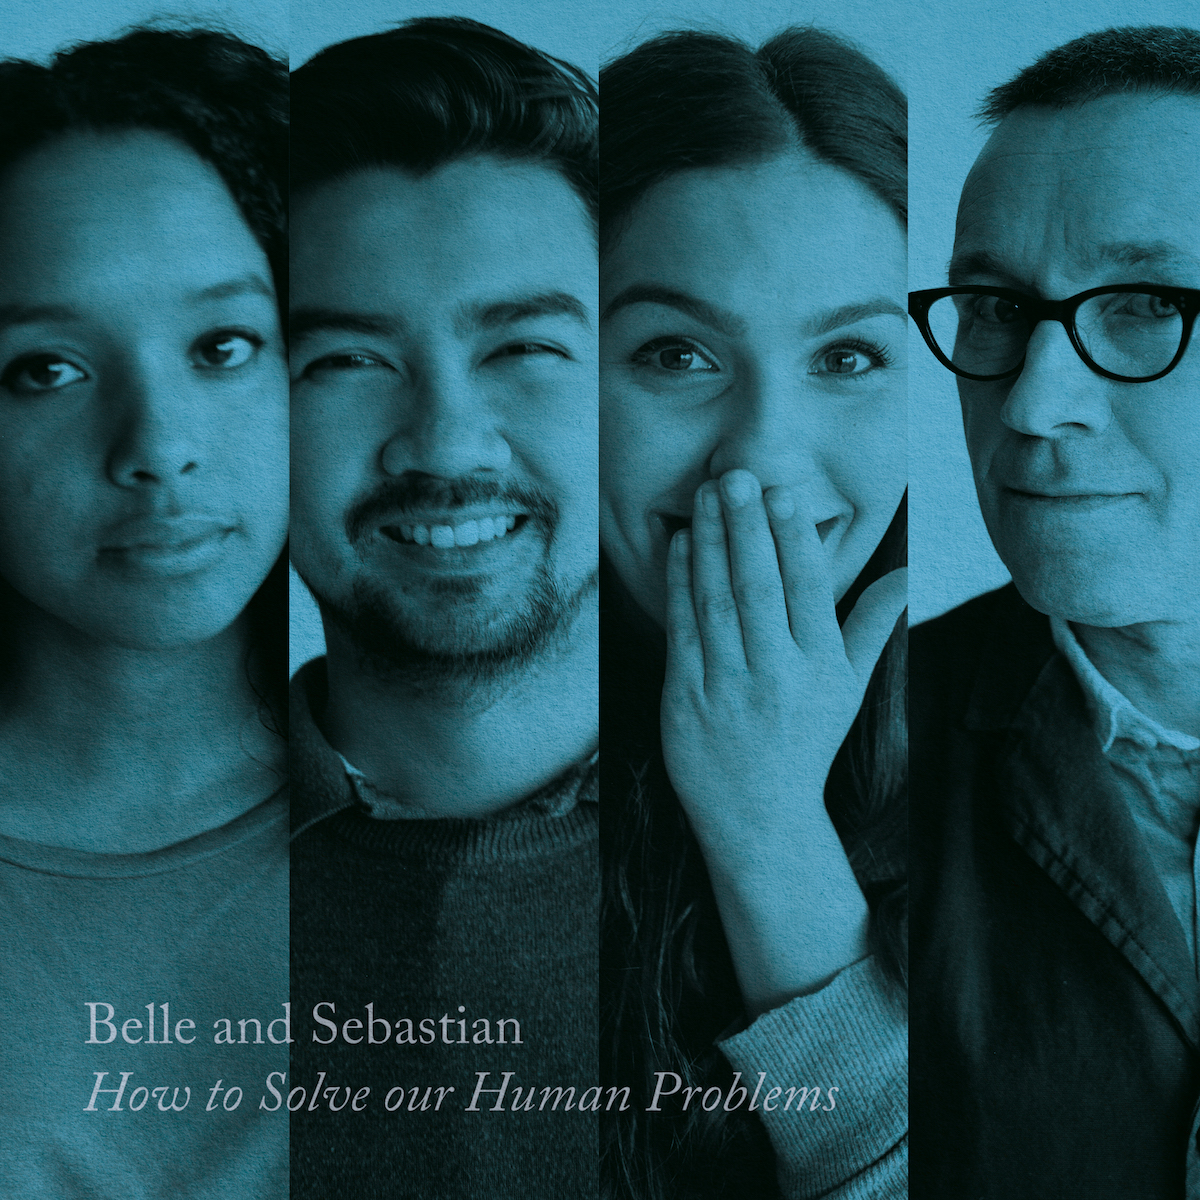 Belle and Sebastian Announce <i>How to Solve Our Human Problems</i> EP Trilogy, Release “I’ll Be Your Pilot”” title=”4000x4000px_EP3Cover-1507641821″ data-original-id=”261744″ data-adjusted-id=”261744″ class=”sm_size_full_width sm_alignment_center ” data-image-source=”getty” /></p>
</p><p>To see our running list of the top 100 greatest rock stars of all time, <a href=